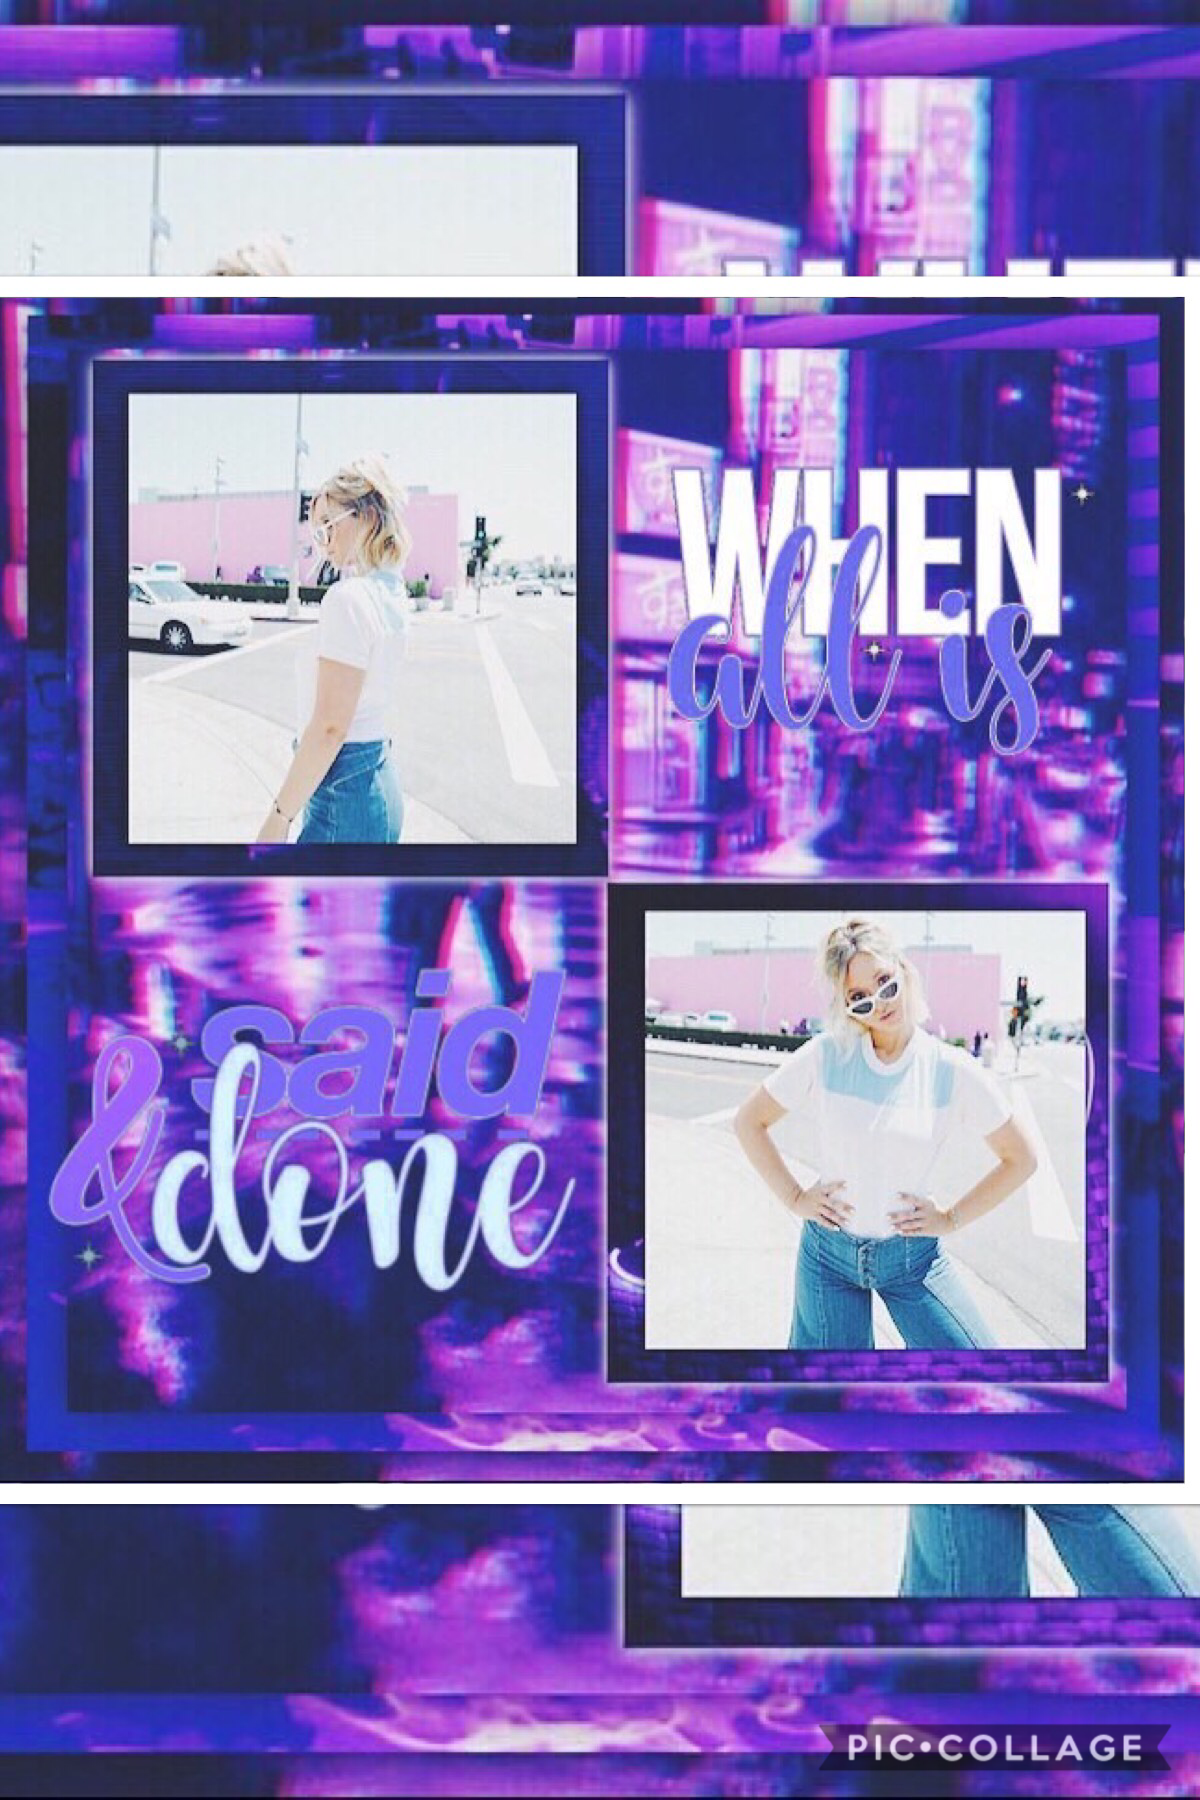 💜💜💜 TAPPY!! 💜💜💜

How are you all doing today?? Get ready for this Alisha theme!! Hope you like it! 💜💗